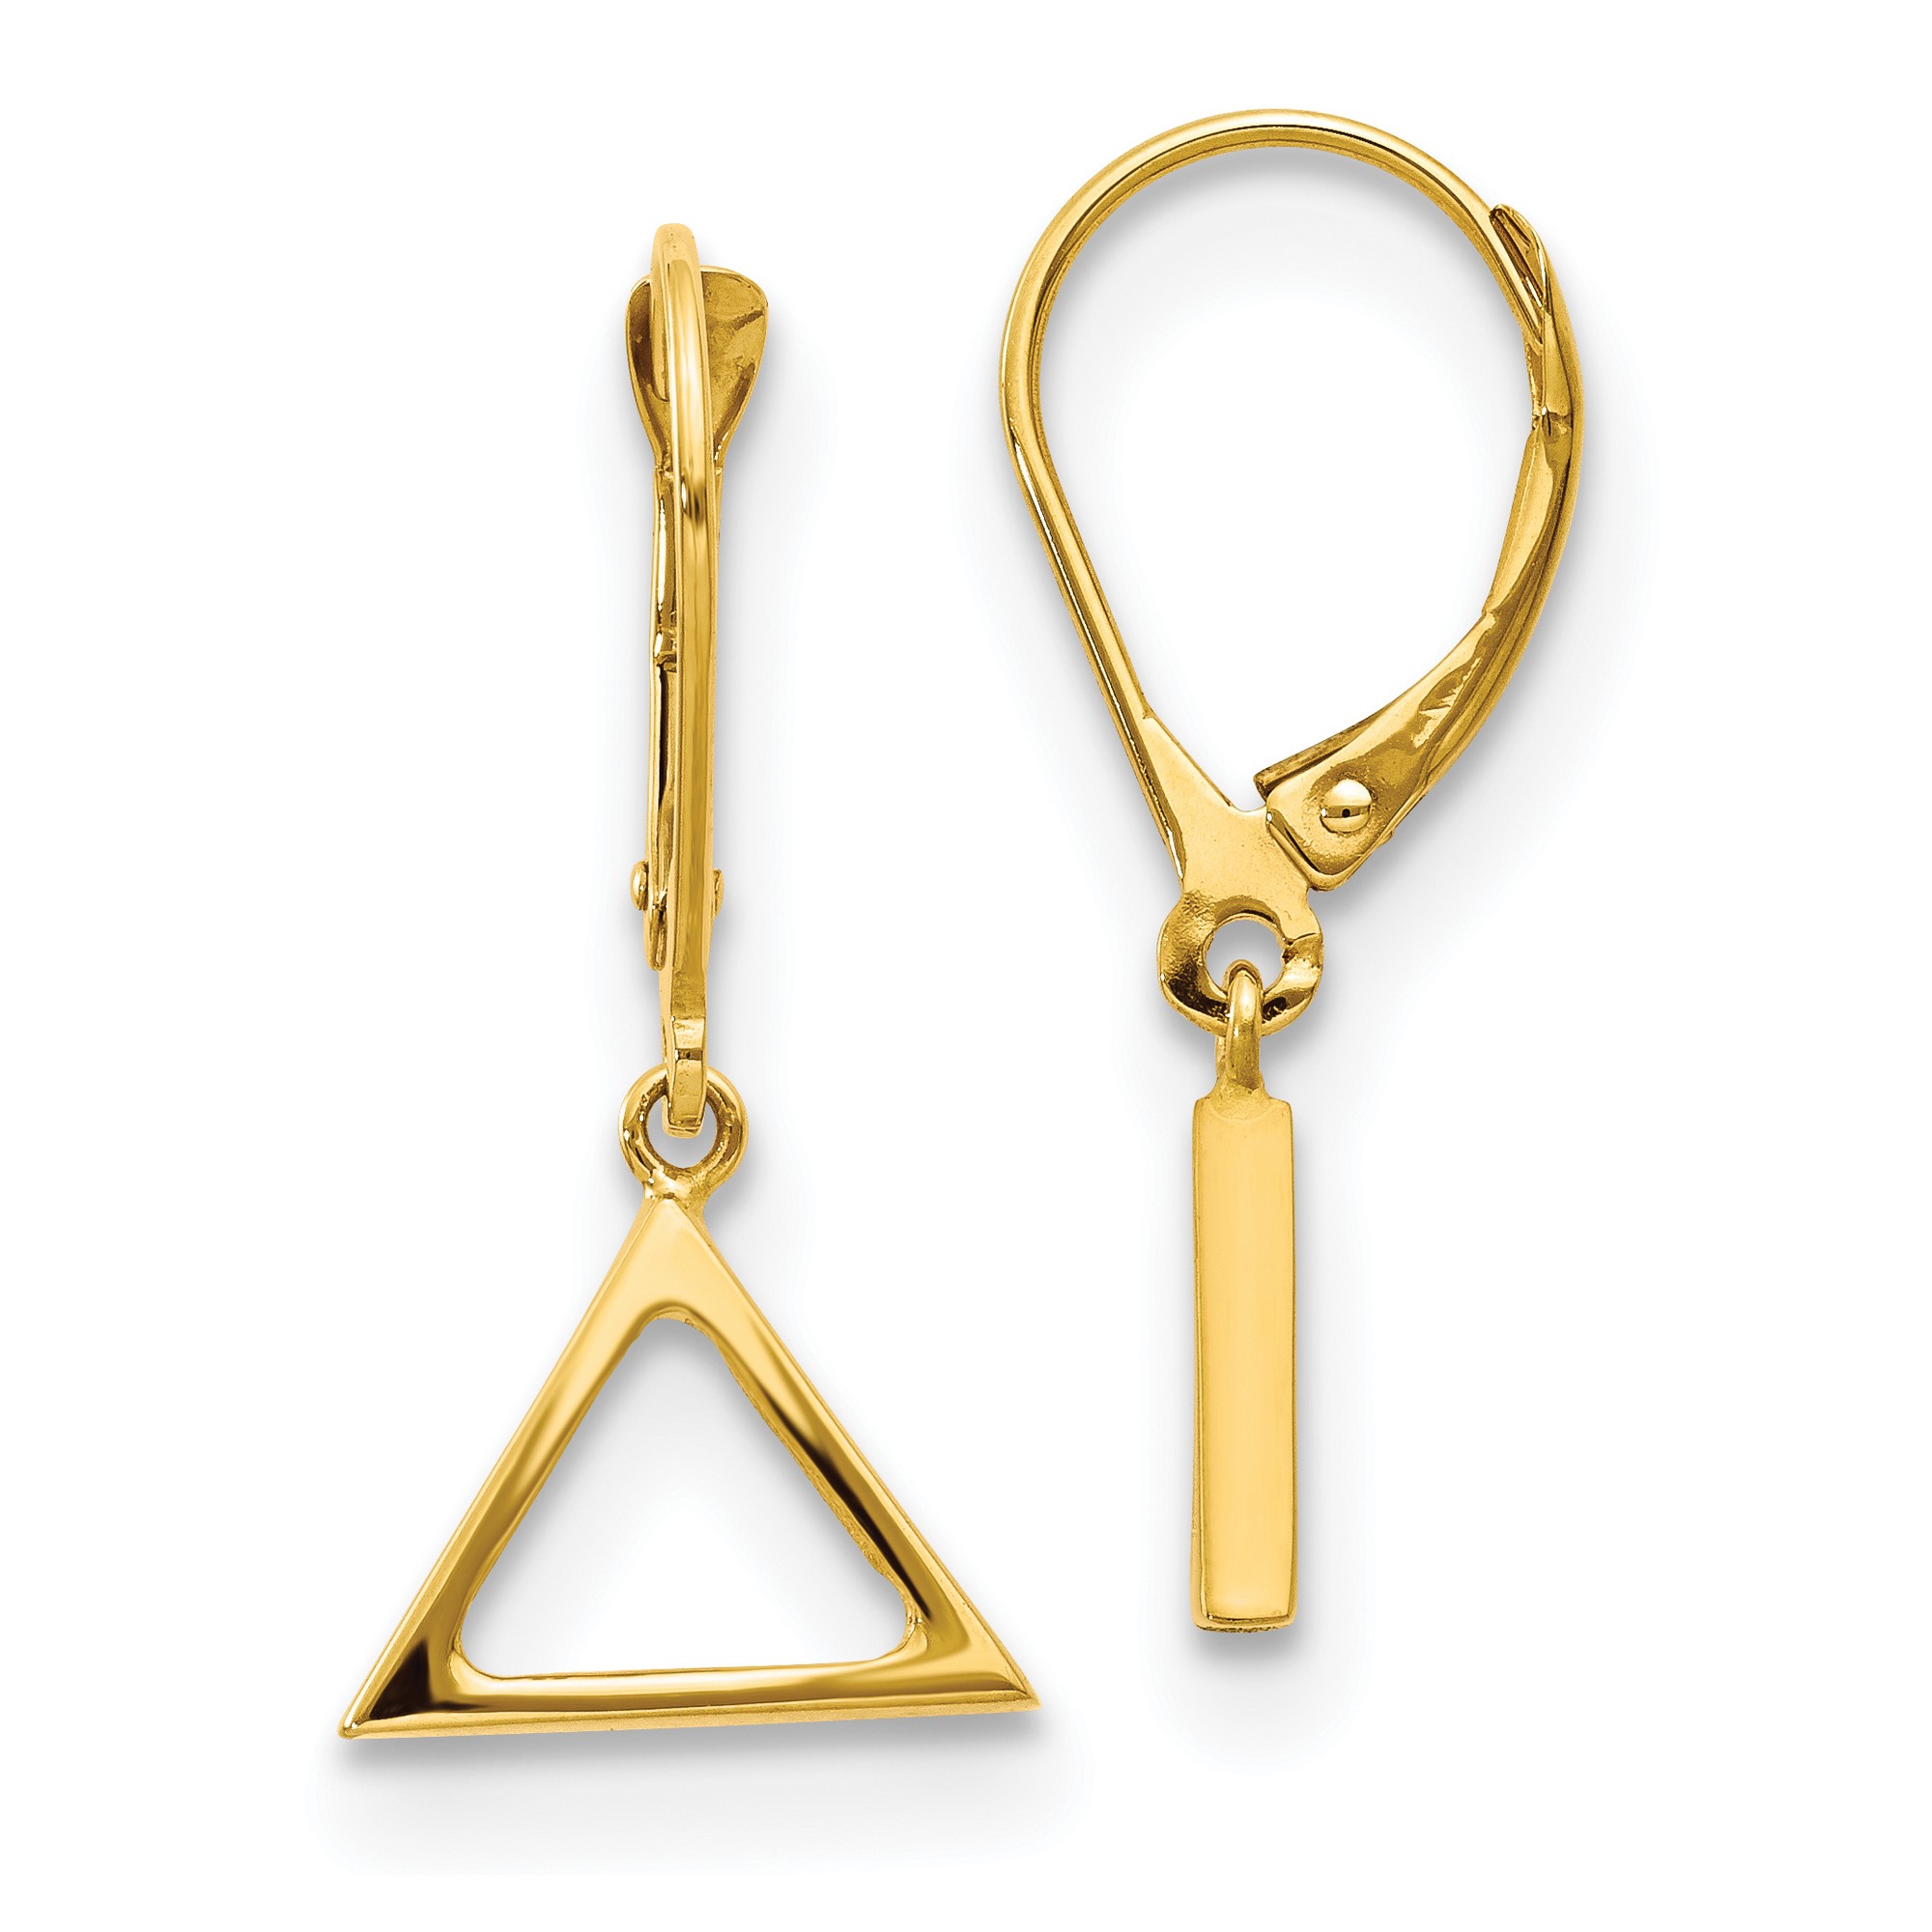 14k Yellow Gold Polished Triangle Dangle Leverback Earrings 26x12 mm - image 1 of 5